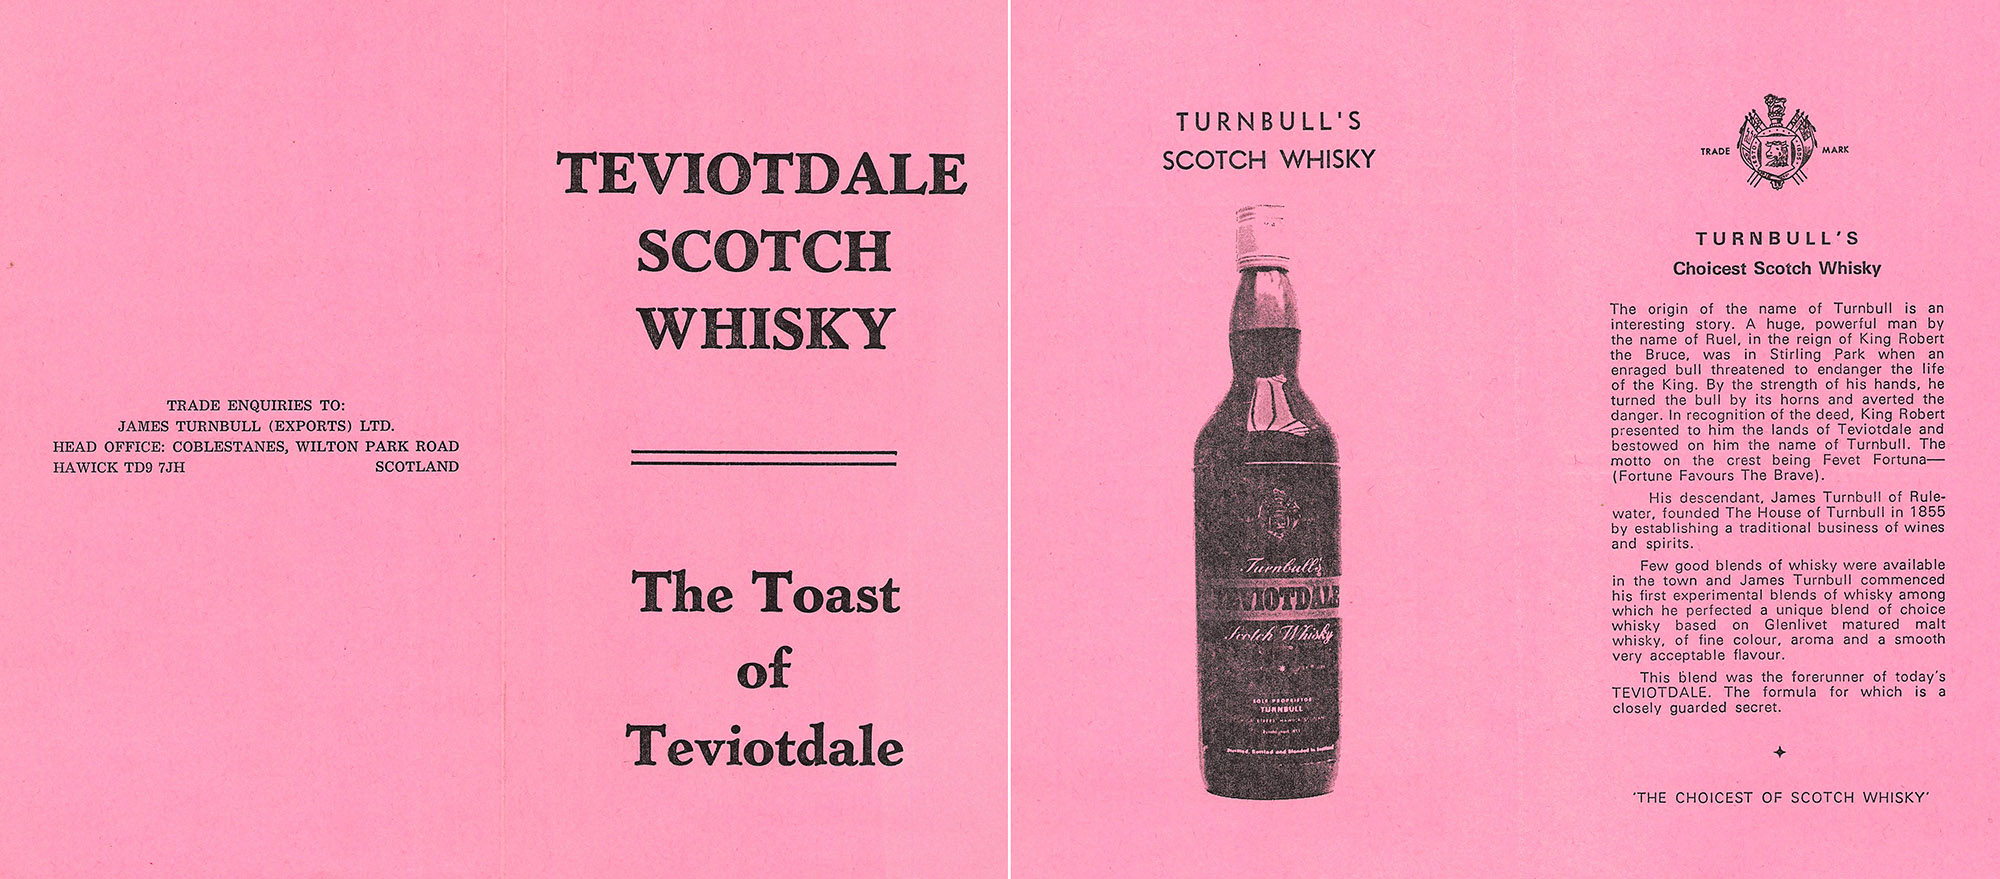 The Toast of Teviotdale